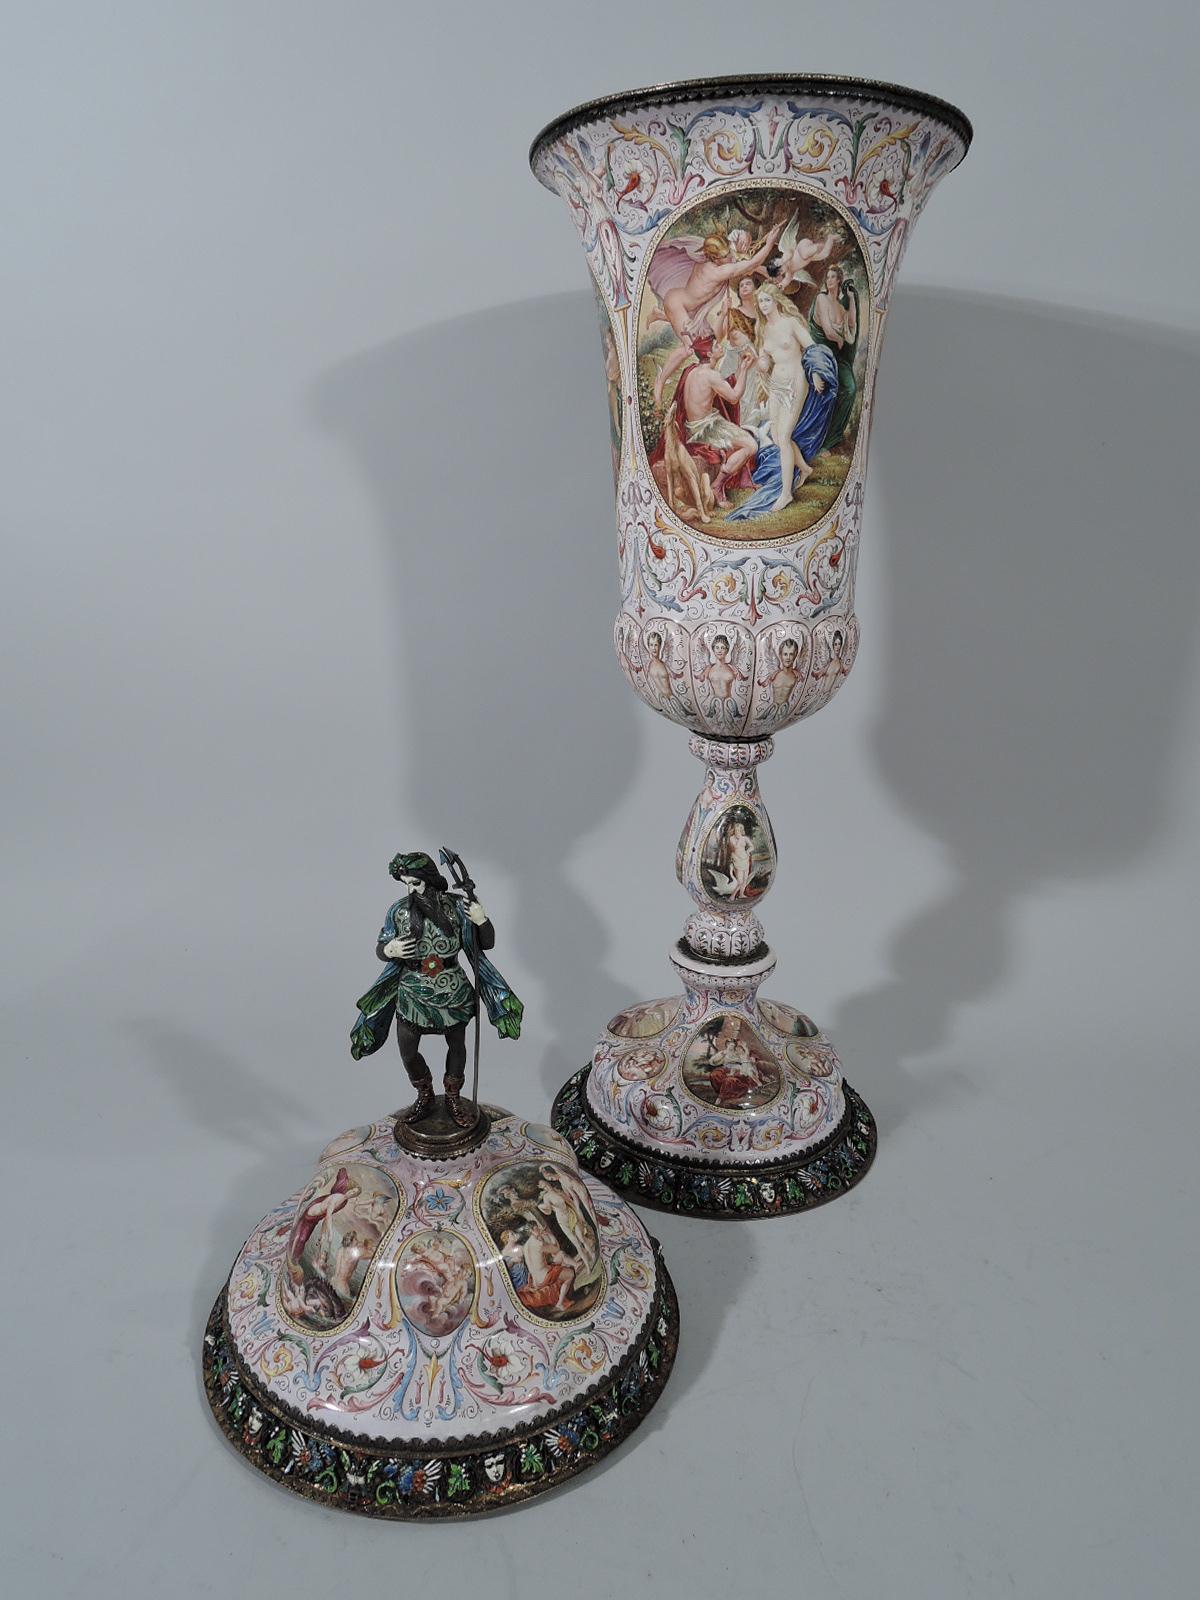 Tall classical Viennese enamel and silver covered cup, circa 1890. Tapering bowl with lobed vase on baluster stem on domed foot. Double-domed cover with figural finial in form of Neptune, a triton-holding bearded man in double and hose. Painted oval